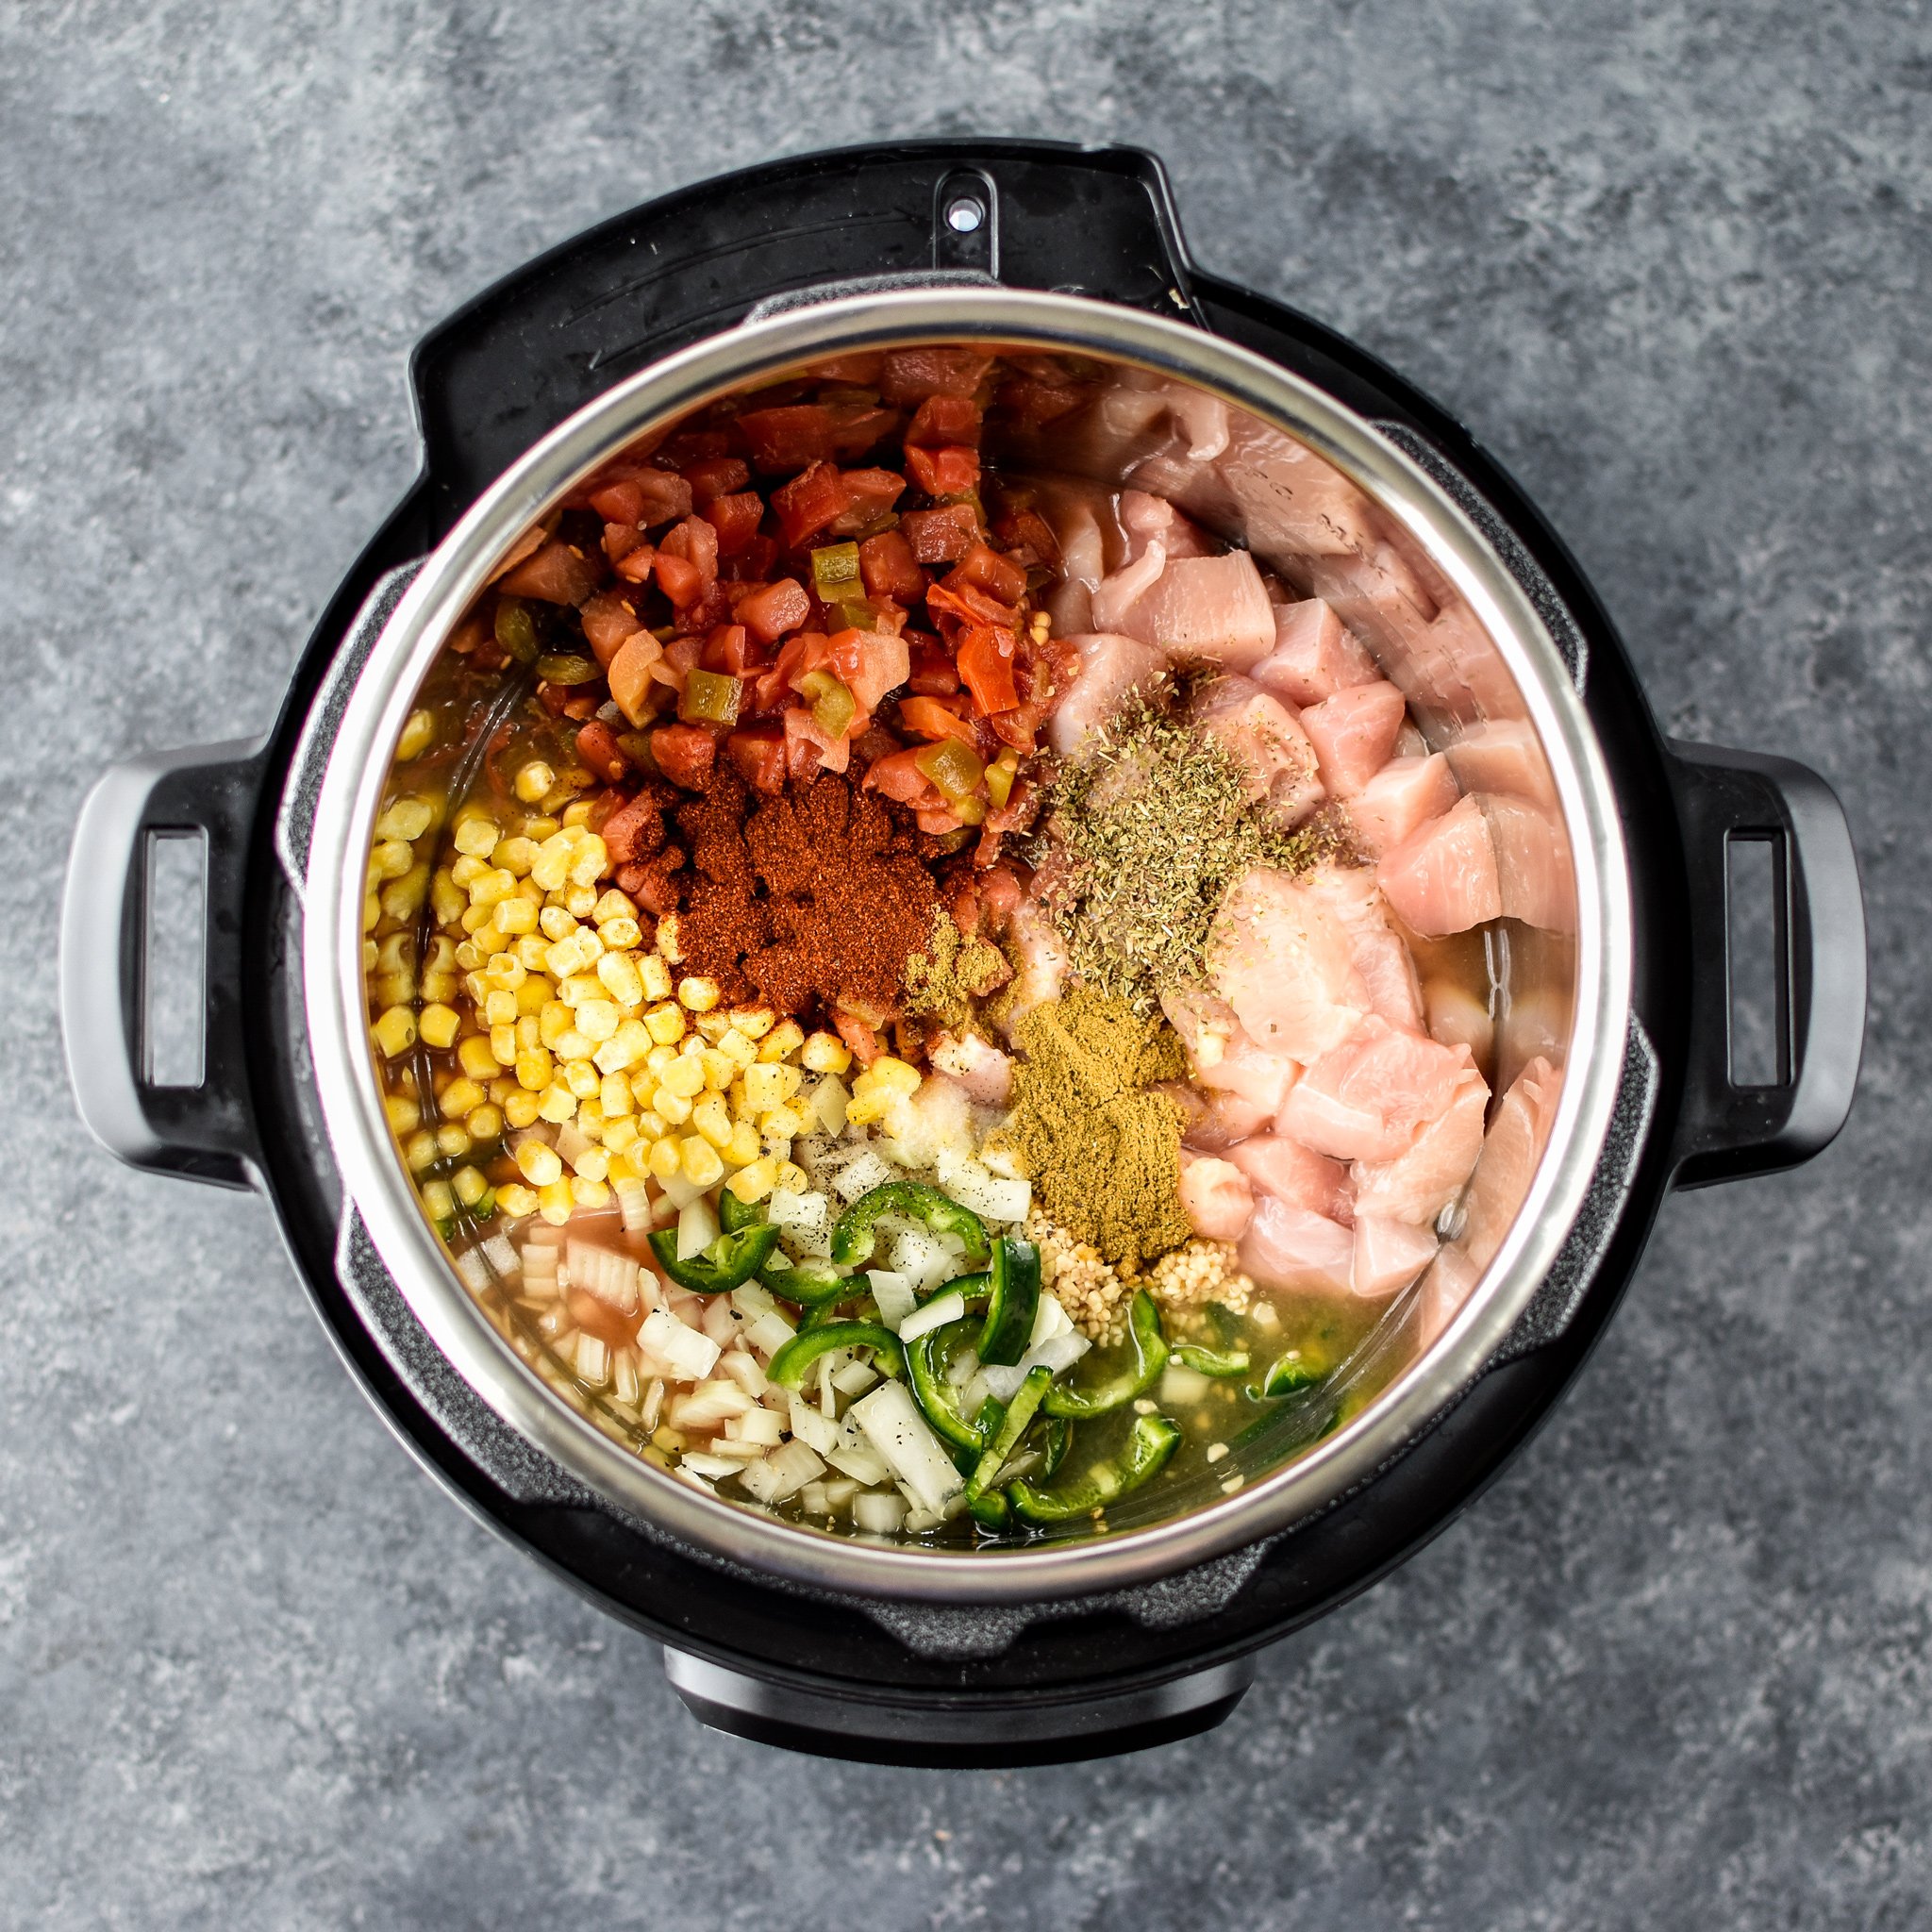 A view of the ingredients for the Instant Pot Jalapeno Popper chicken Soup inside the Instant Pot from above.